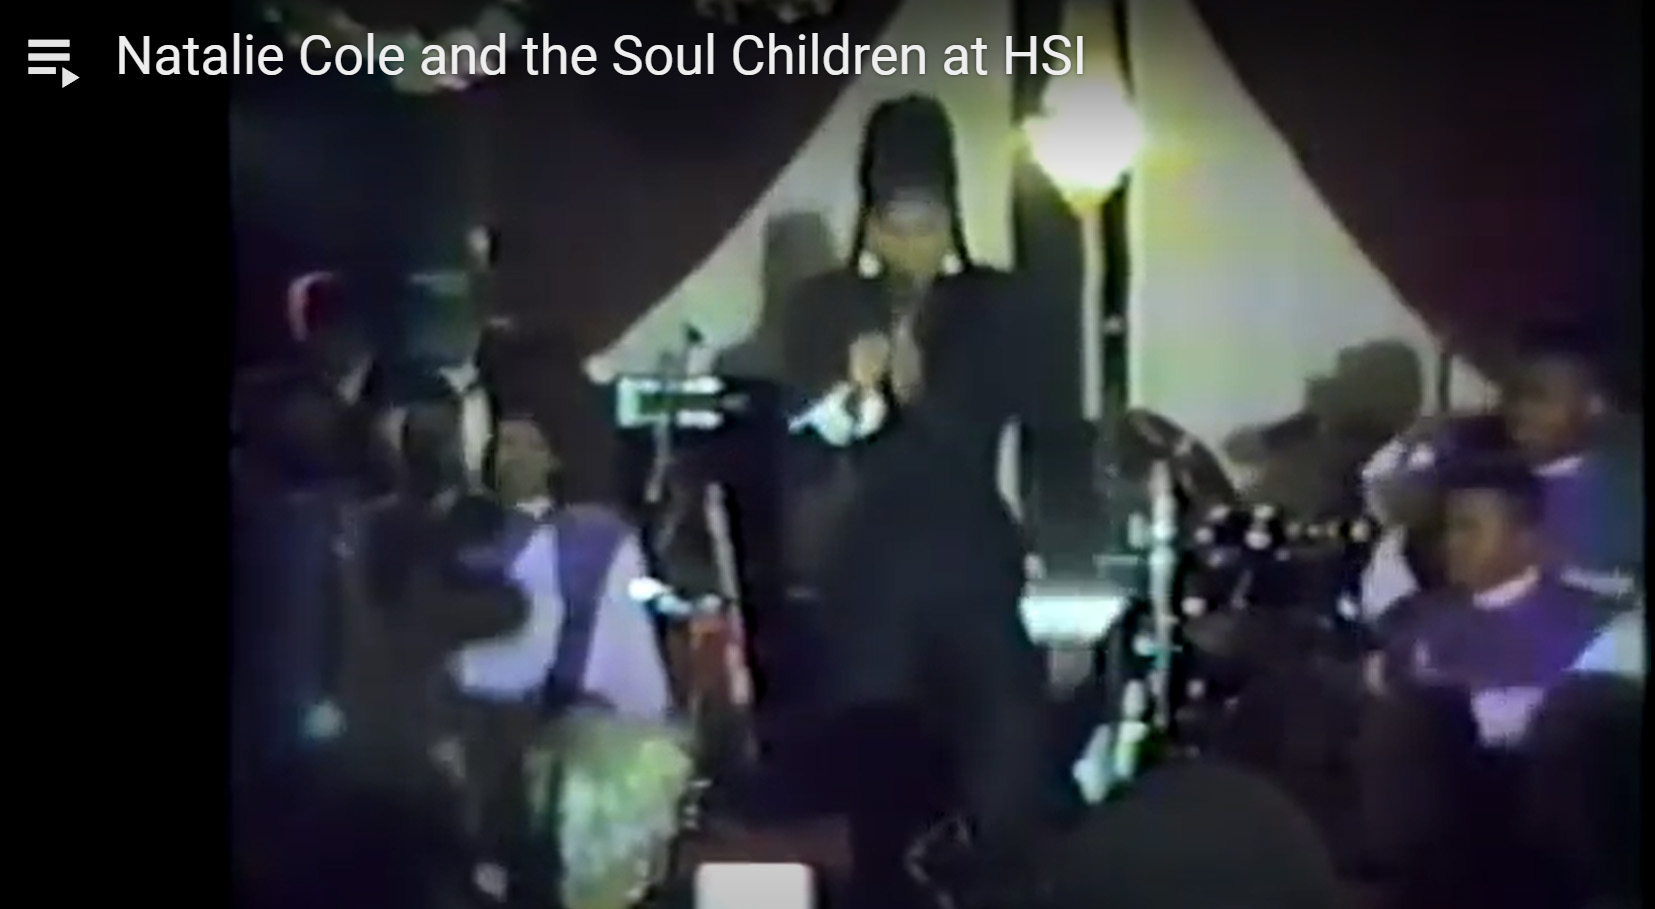 Natalie Cole and Soul Children